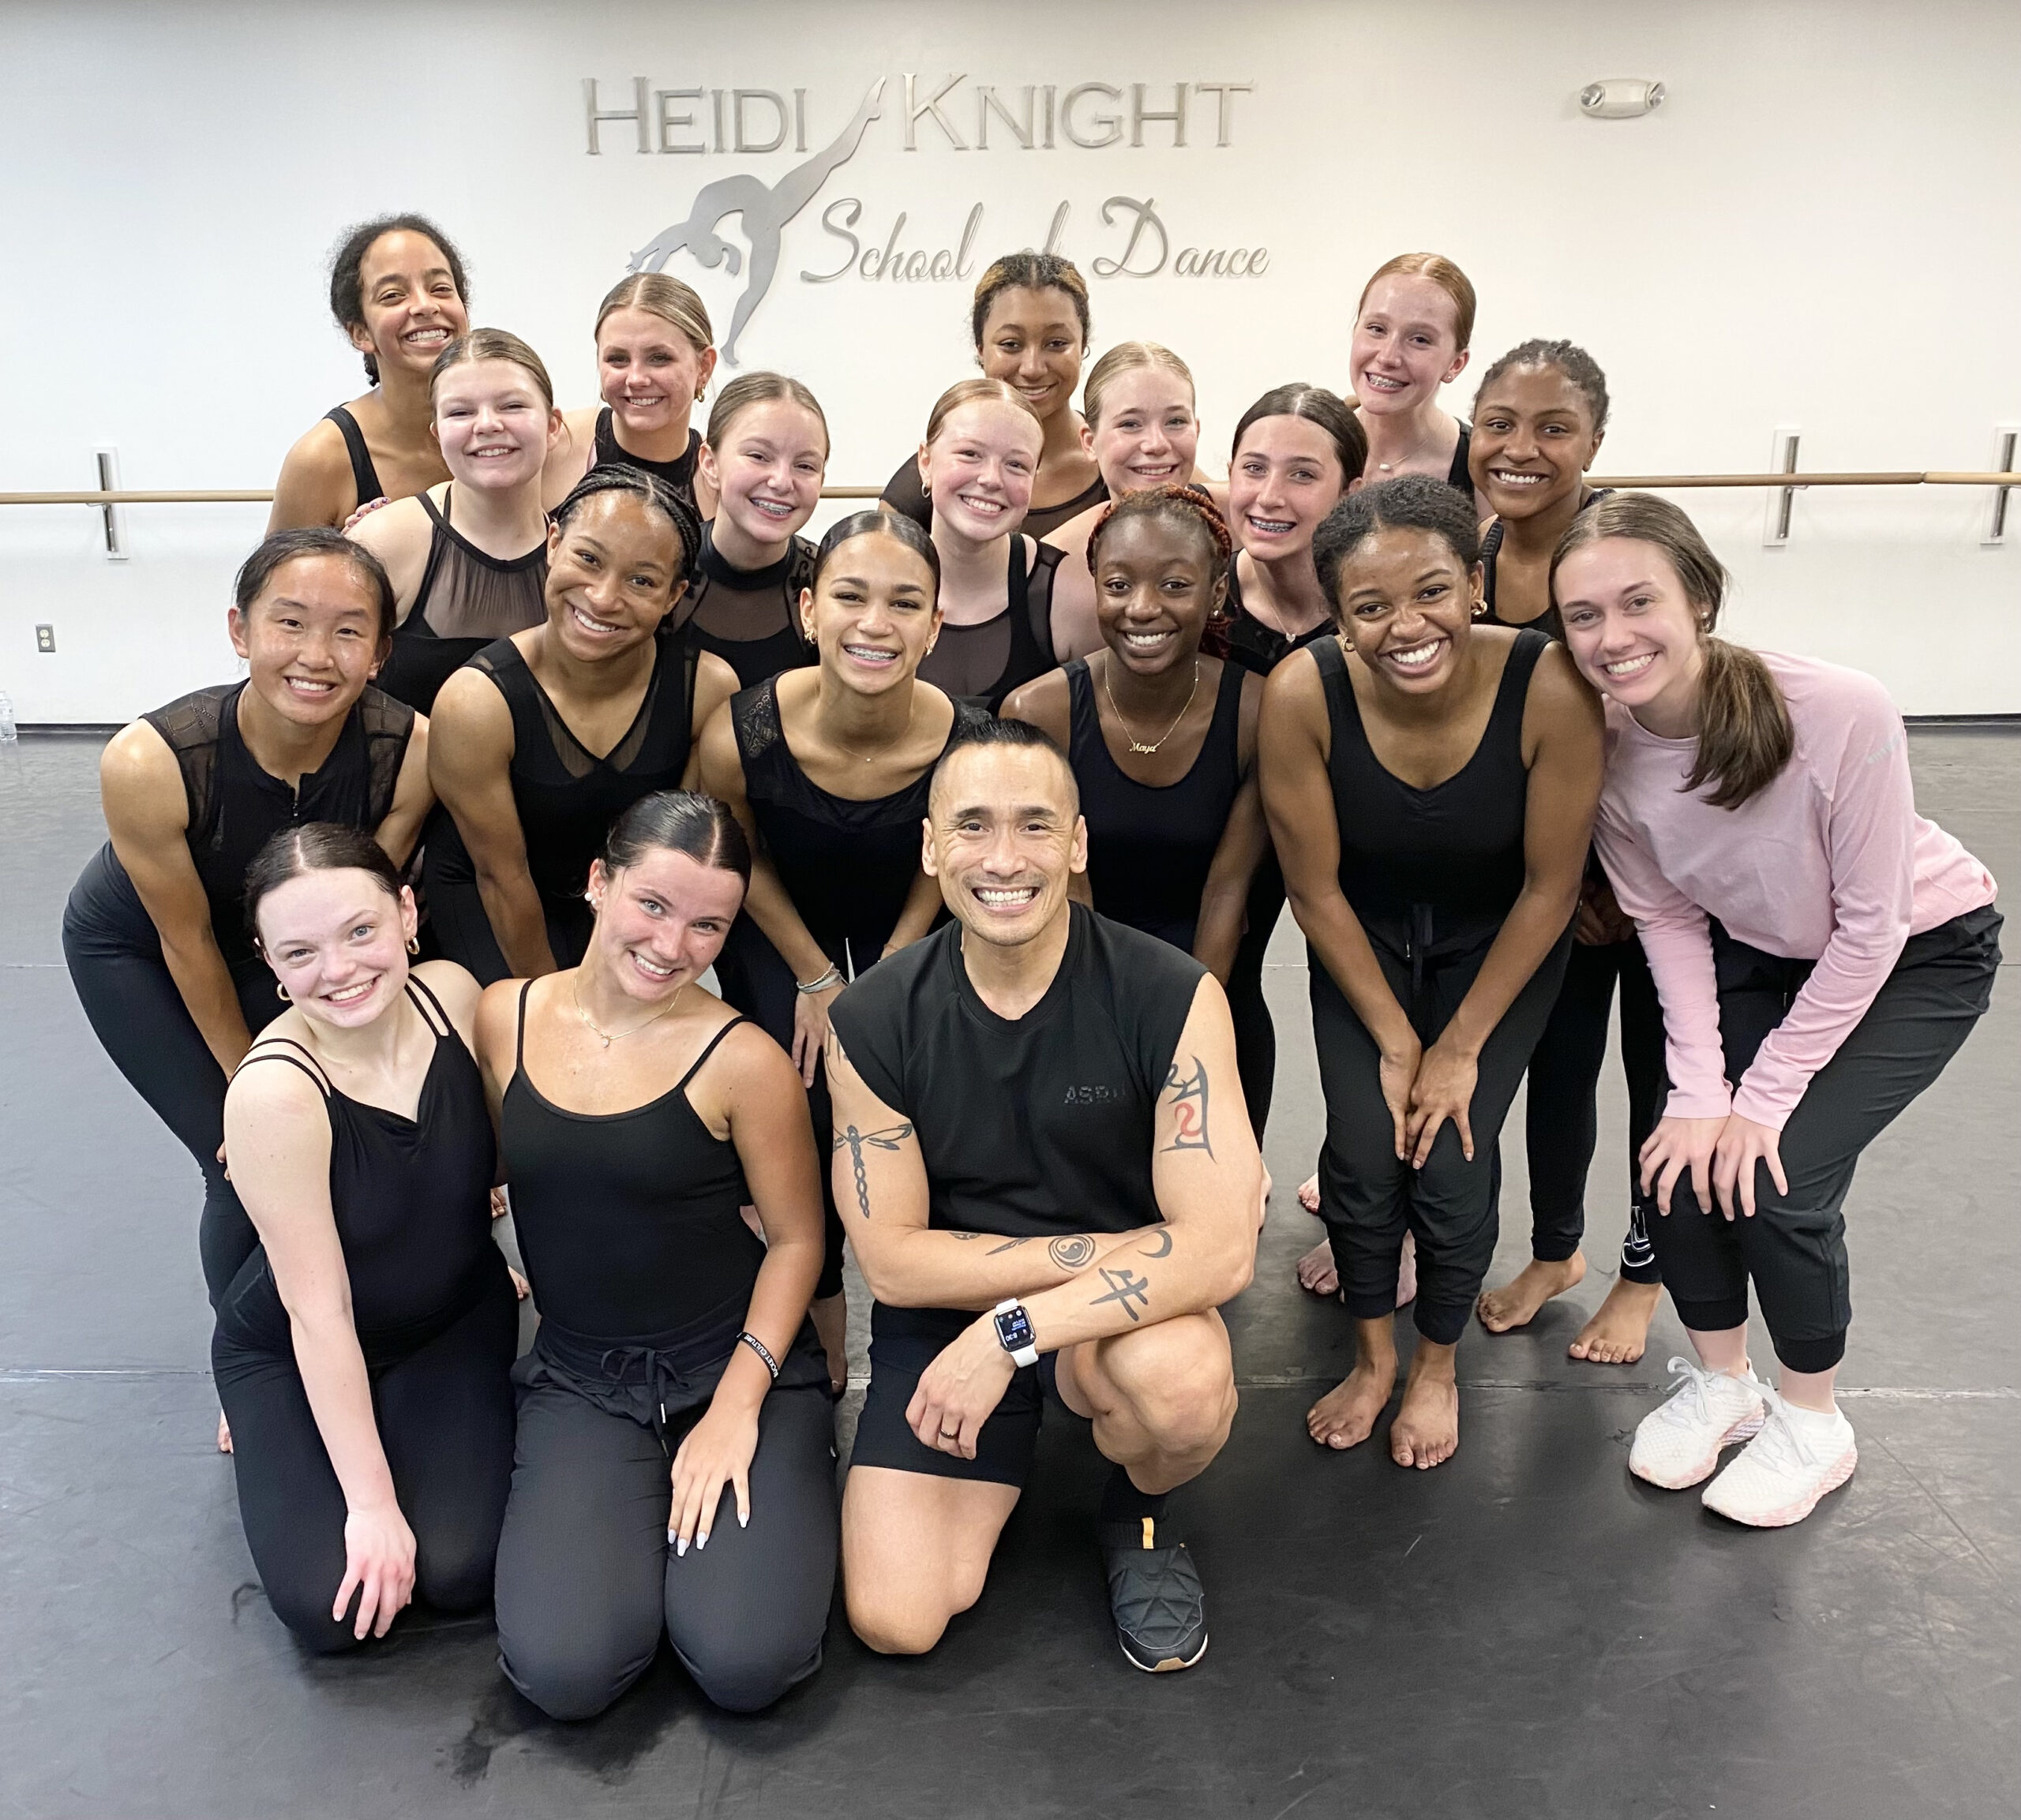 Guest choreographer Francisco Gella (front, center) with students from the Heidi Knight School of Dance.